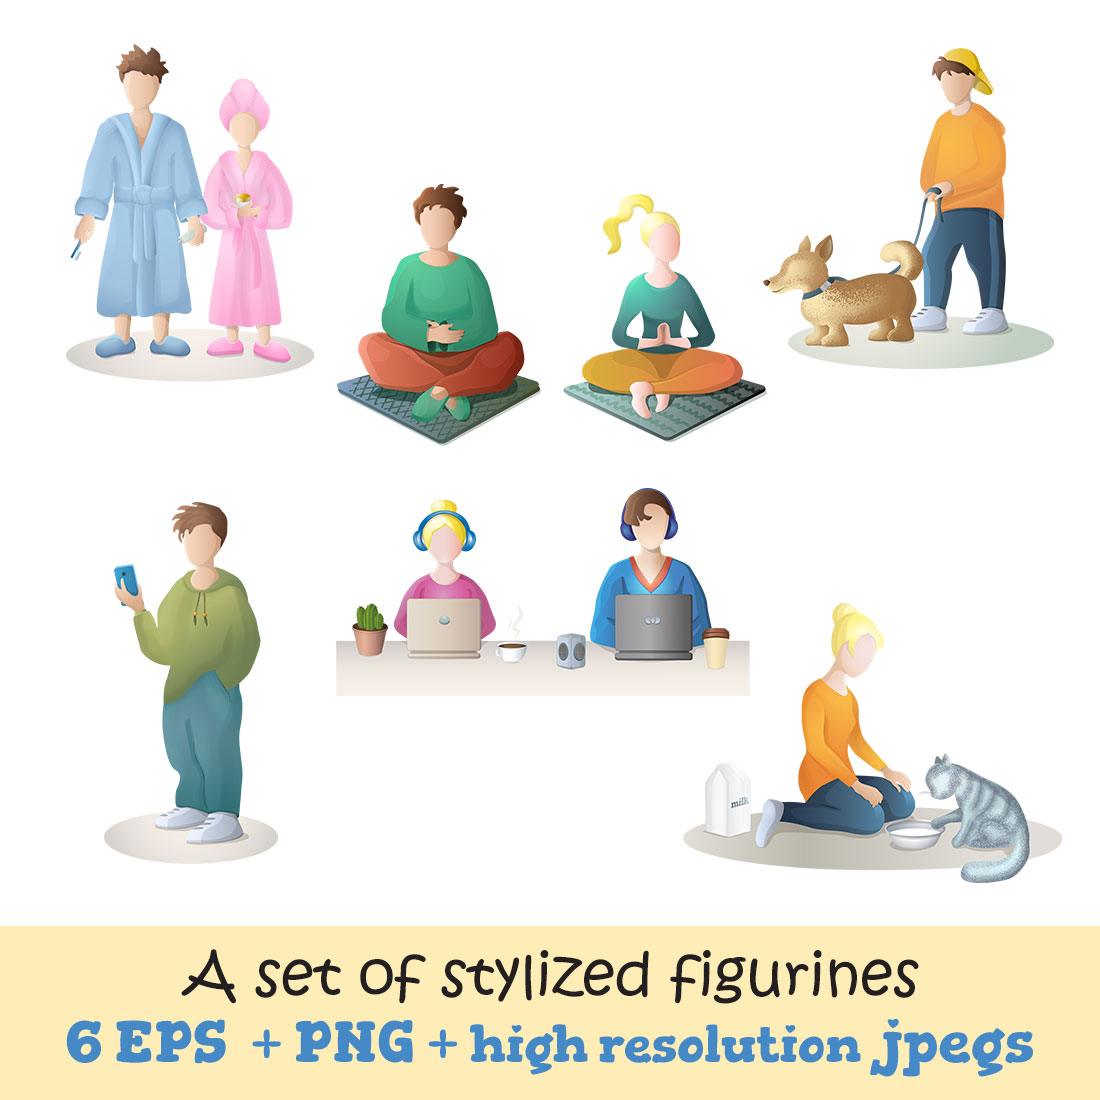 mokup a set of stylized figurines engaged in various activities 2